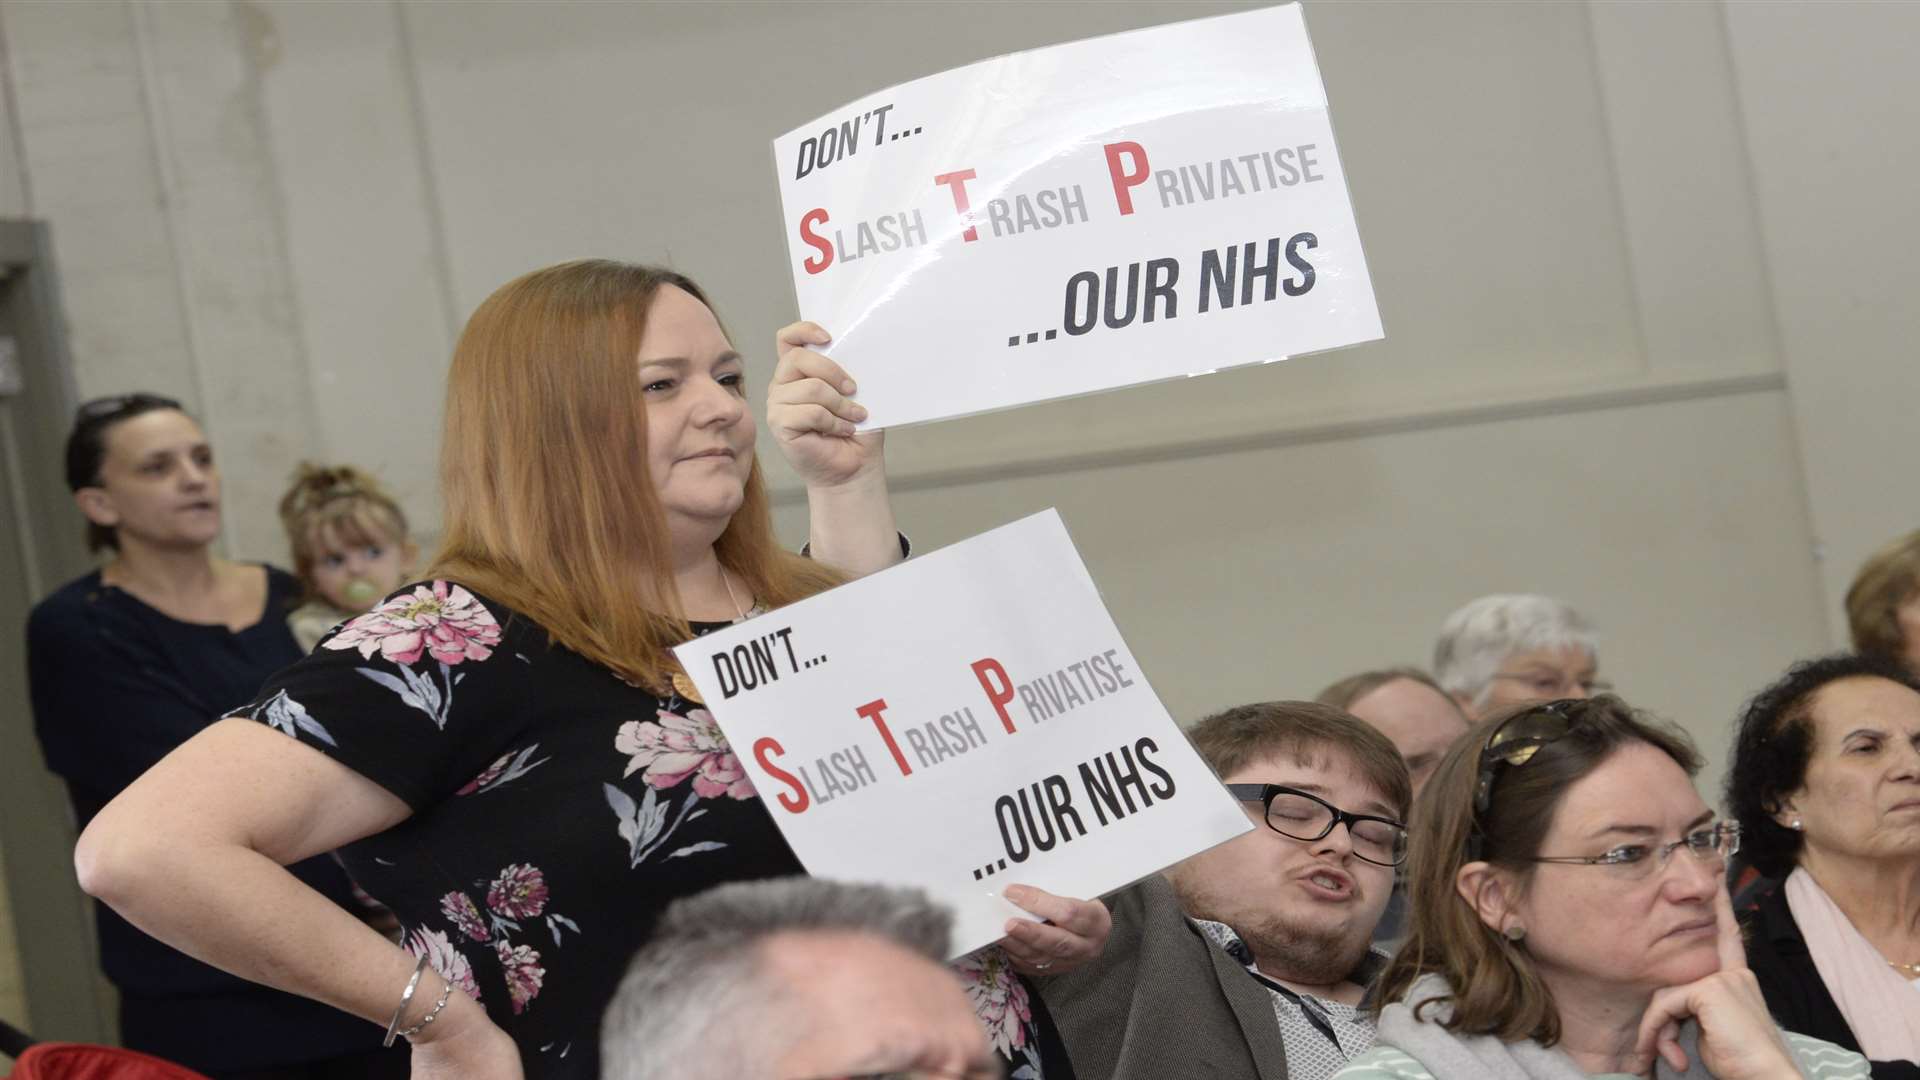 Campaigners for health services at a public meeting in Canterbury.